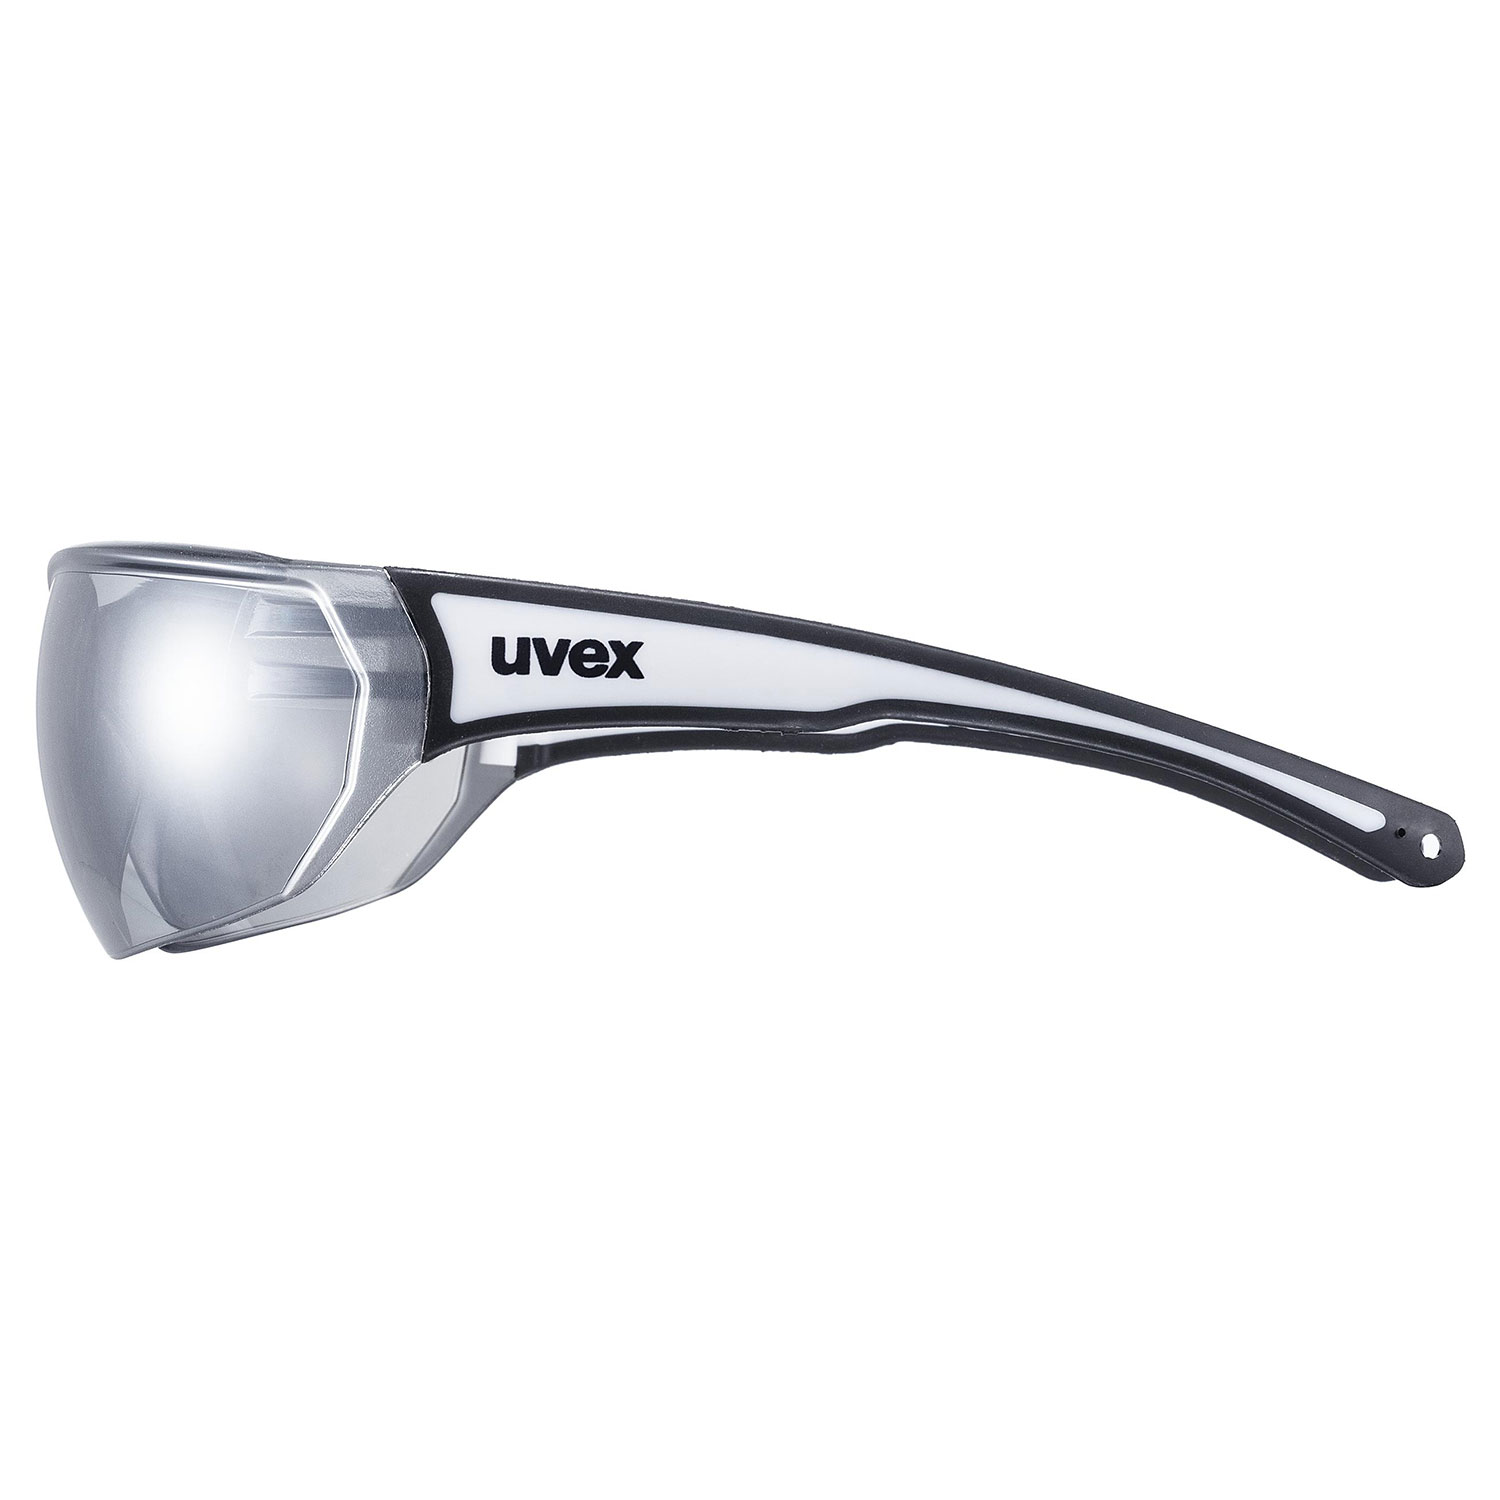 UVEX Sportstyle 204 Black Wh/mir.silver (s5305252816)